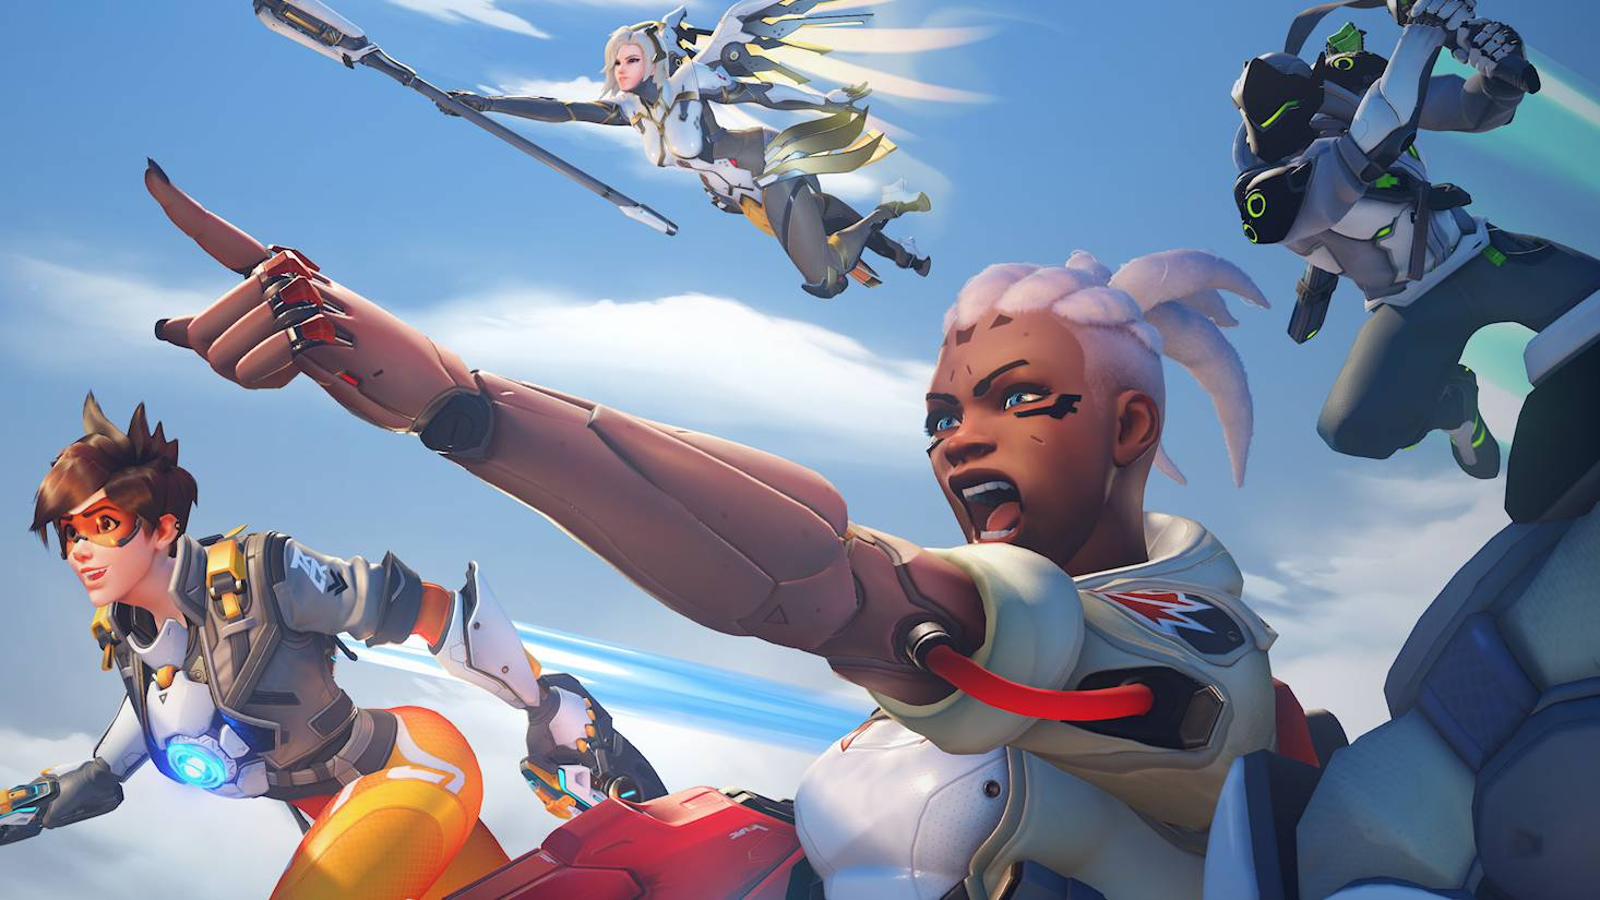 Overwatch 2 changes: Here are the biggest changes in Overwatch 2